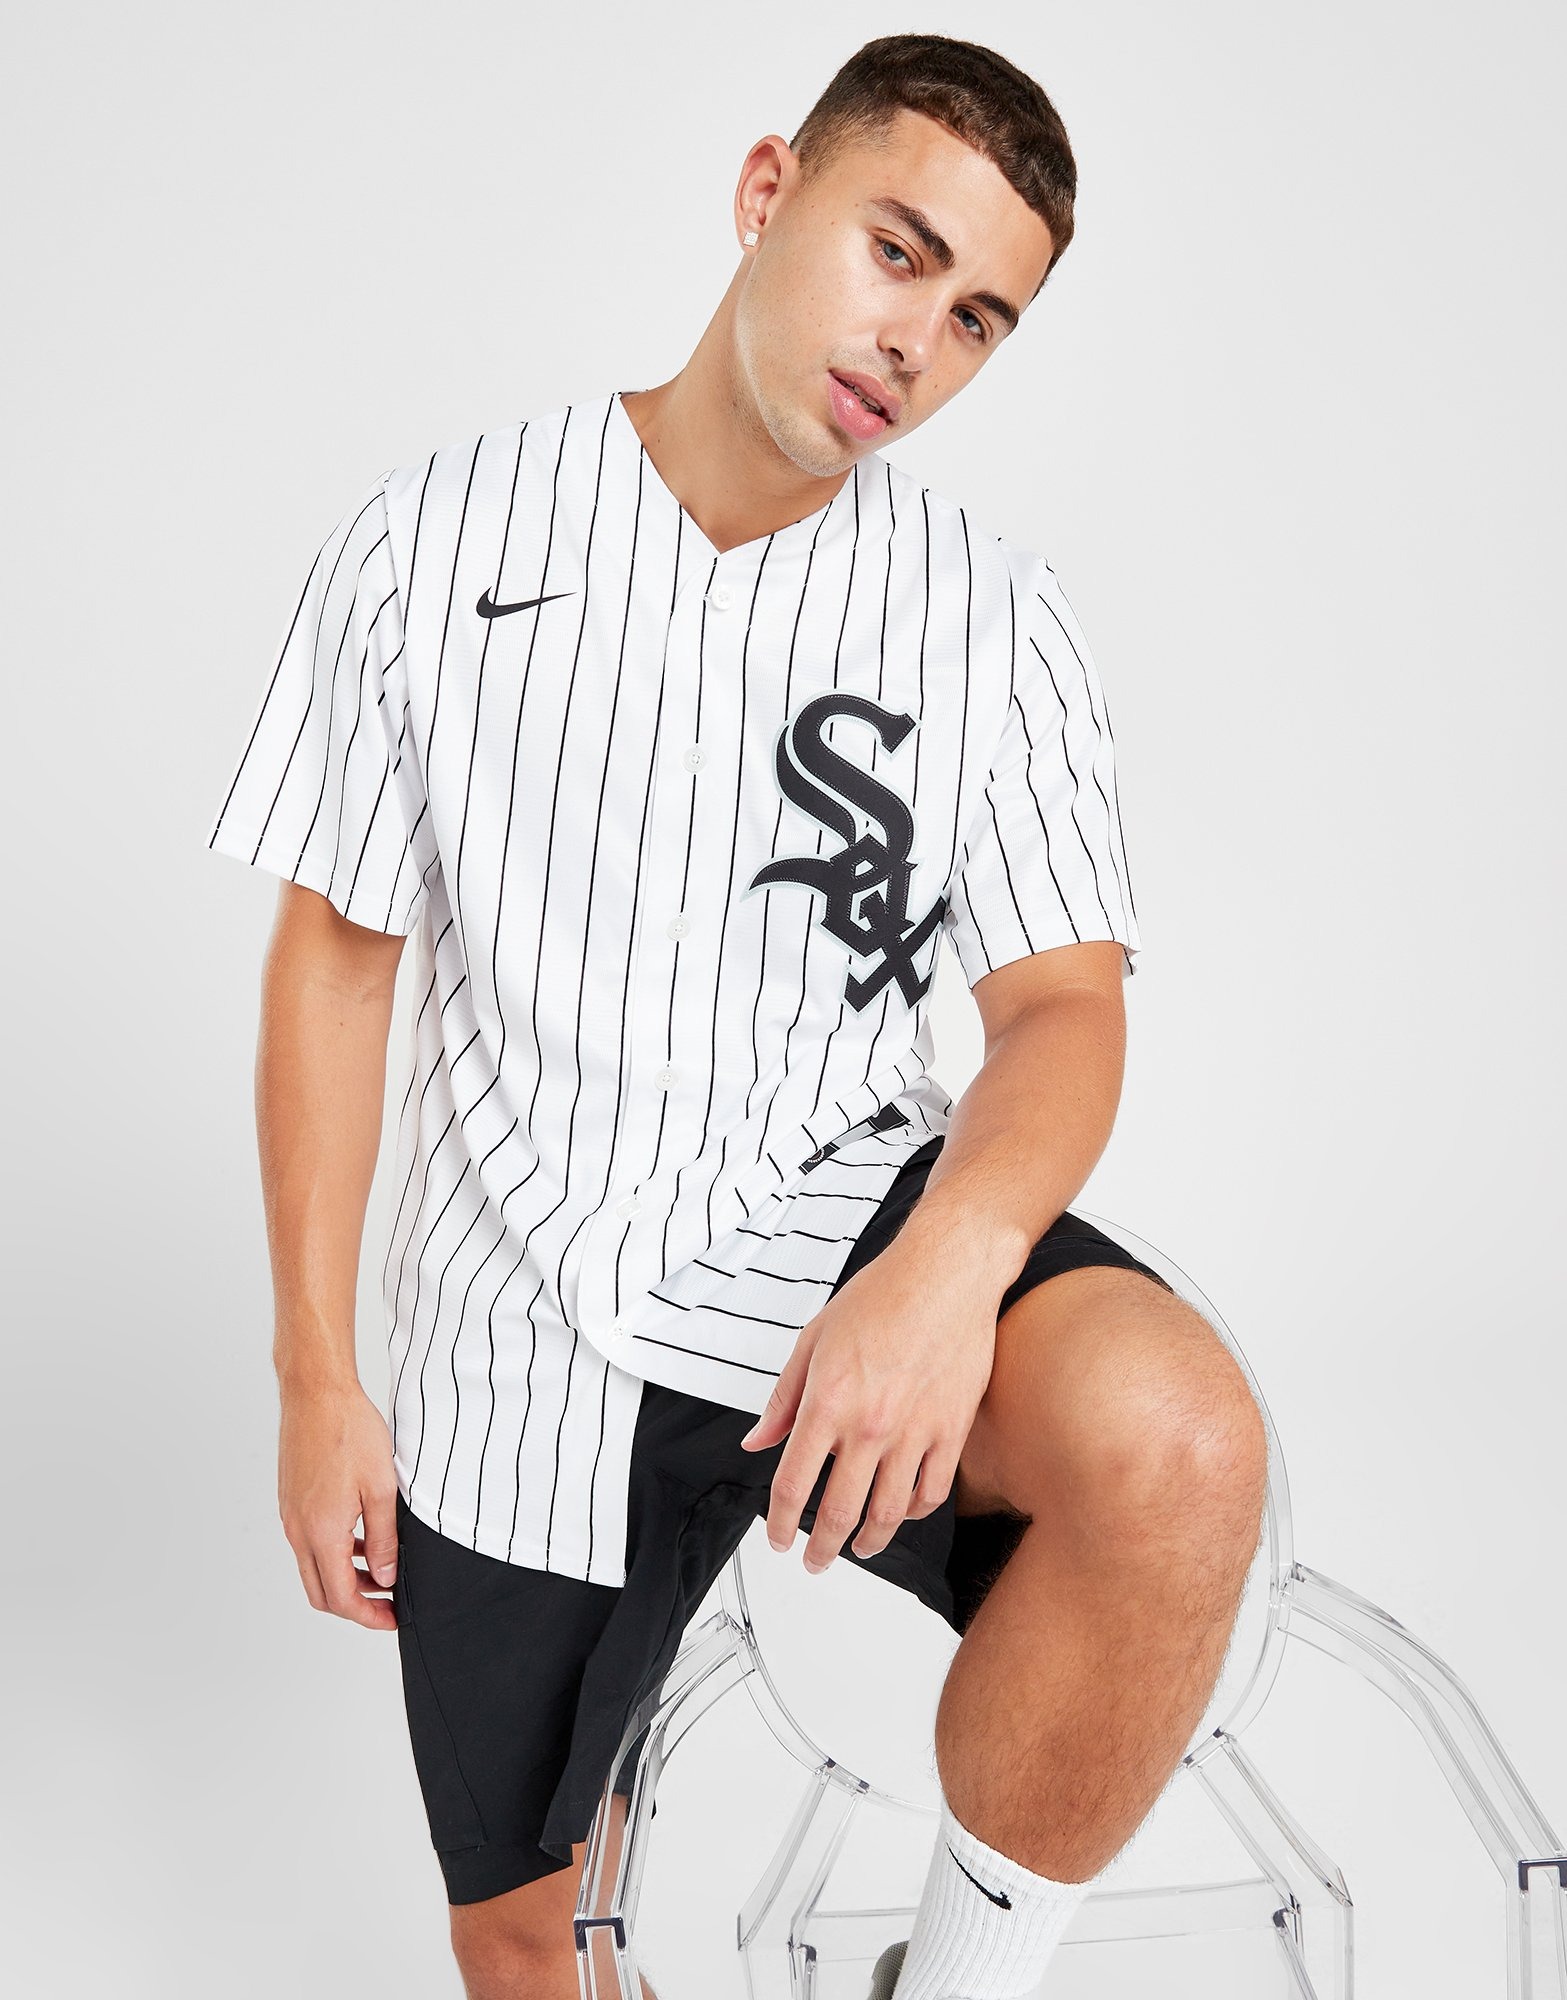  Majestic Chicago White Sox Youth Short Sleeve Performance Shirt  - White (Chicago White Sox, Small) : Sports & Outdoors